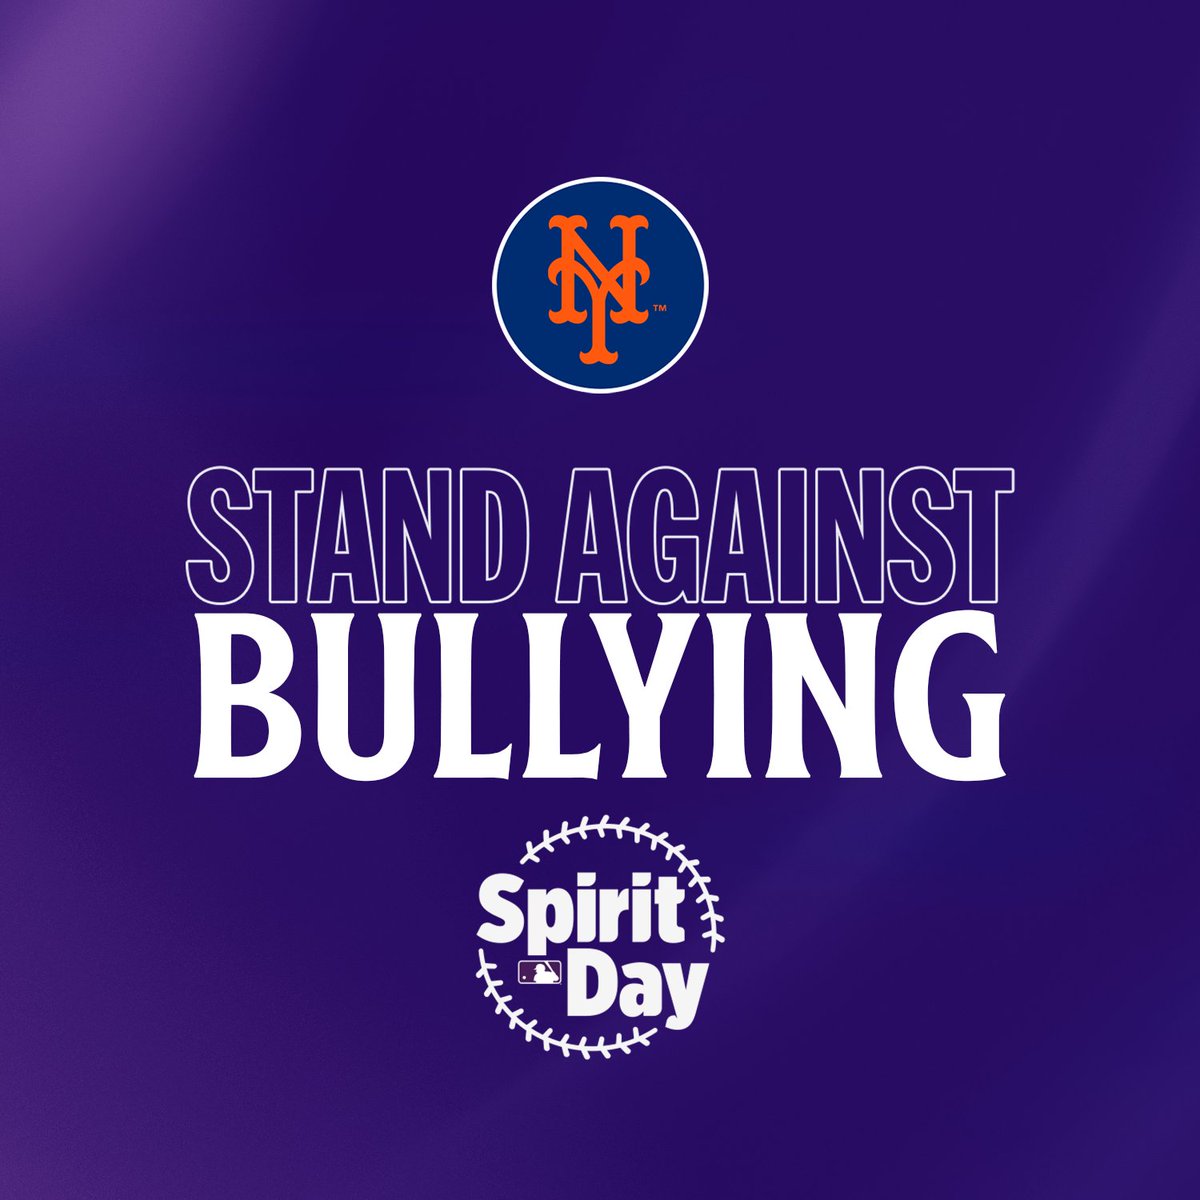 Today and every day, we are proud to support LGBTQ youth and stand against bullying. #SpiritDay 💜